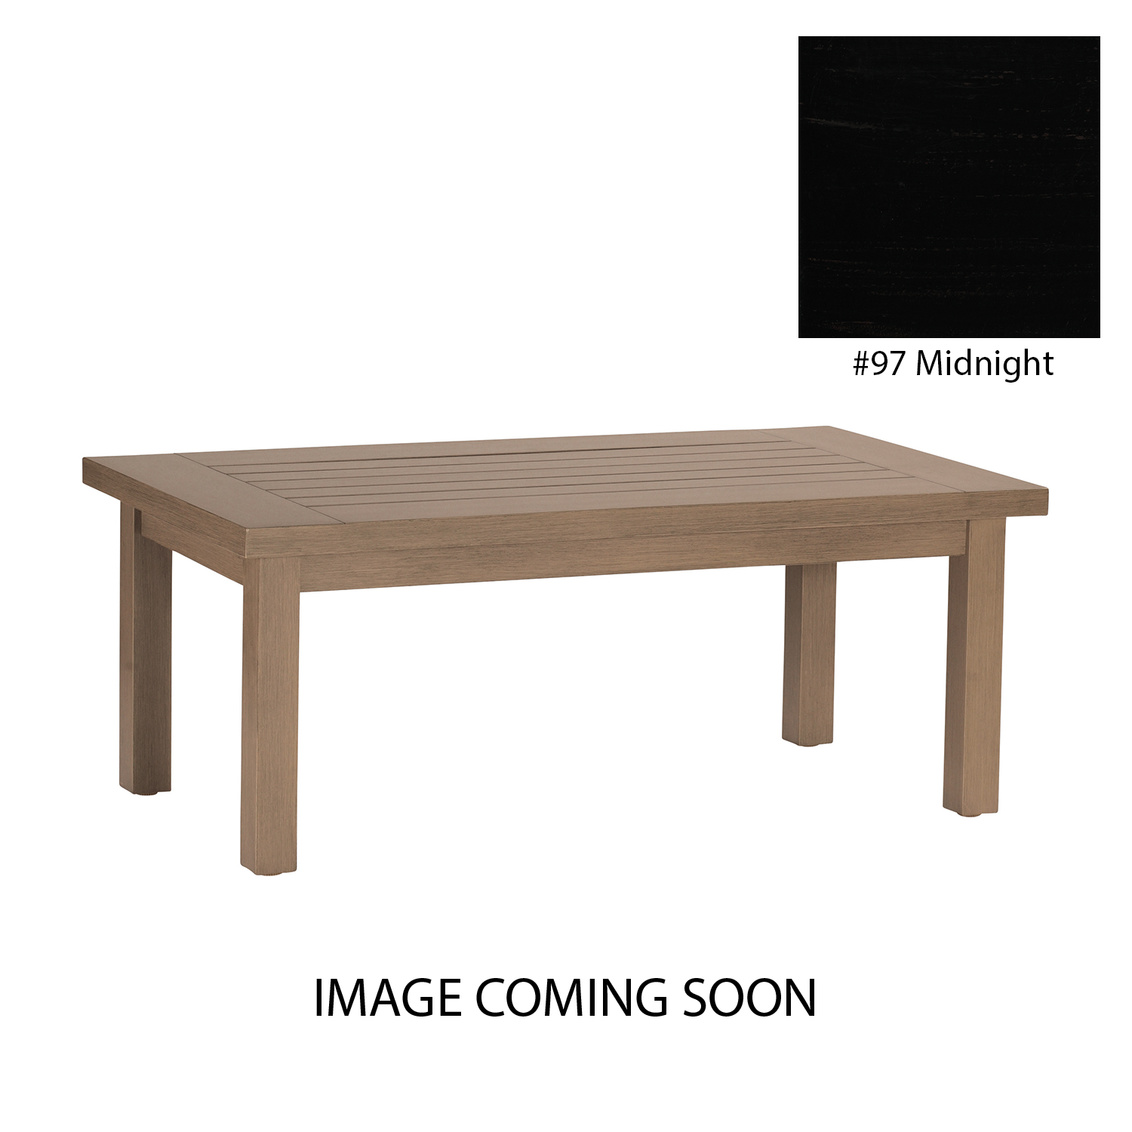 club aluminum rectangular coffee table in midnight product image